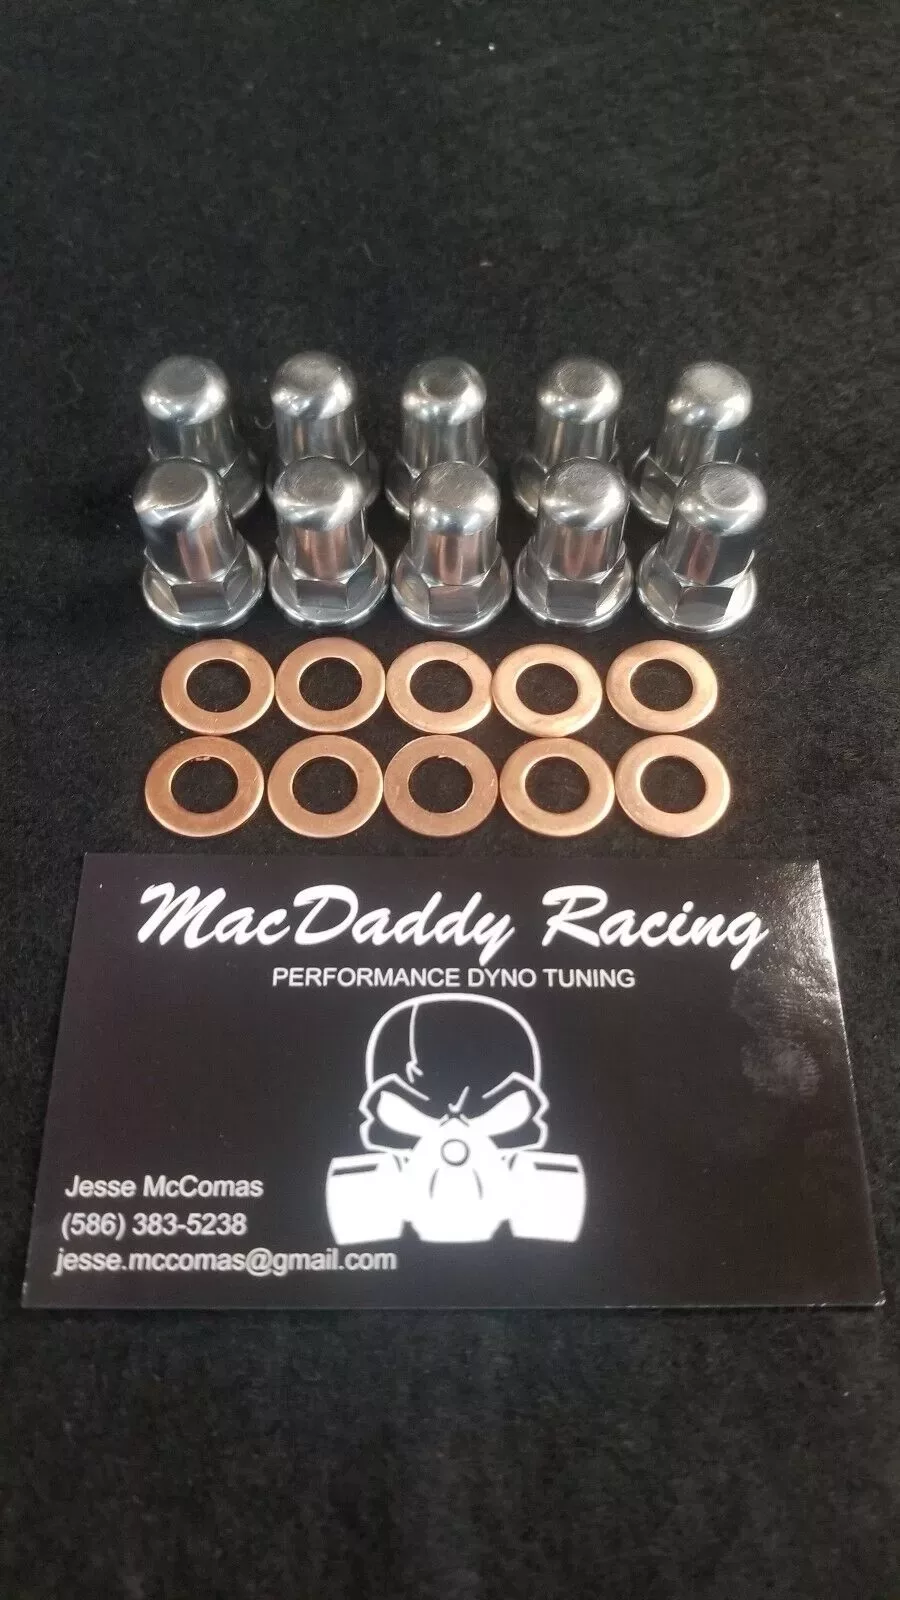 Yamaha Blaster head nuts and washers from MacDaddy Racing. 6 nuts and 6 washers to accommodate your Yamaha Blaster and provide a very clean look.